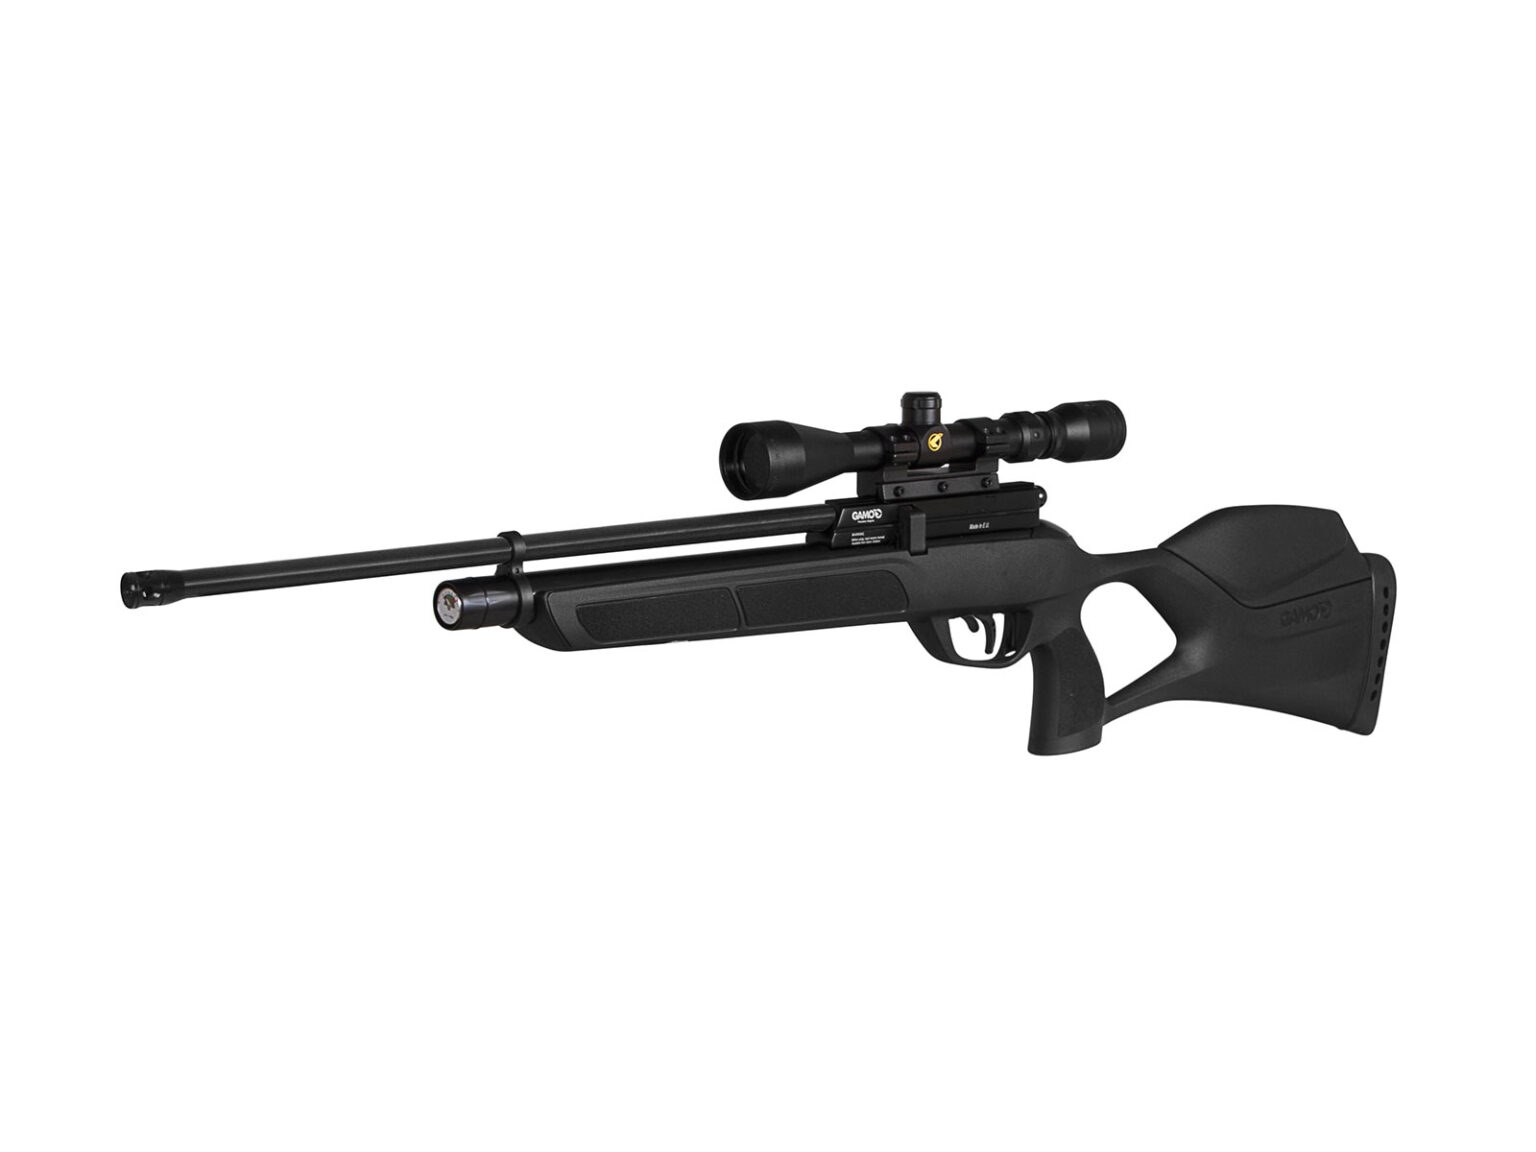 Gamo GX40 PCP Compact and Accurate Precharged Pneumatic Air Rifle